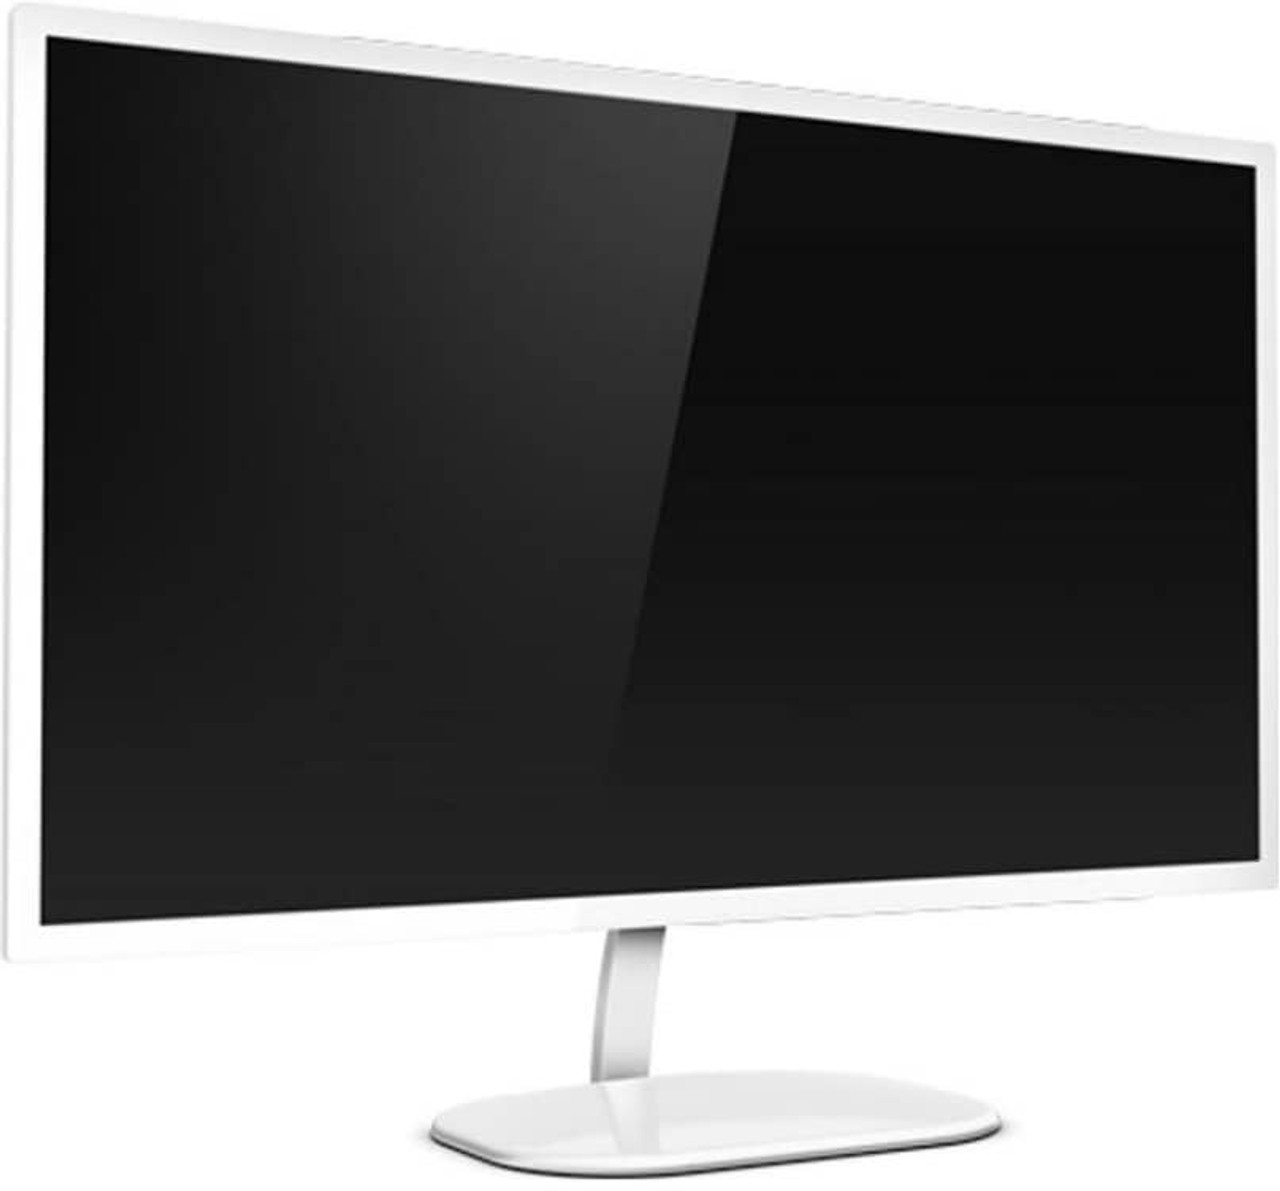 +$399 - 32" 2K Ultra Sharp QHD + HDMI / DP Cable Included